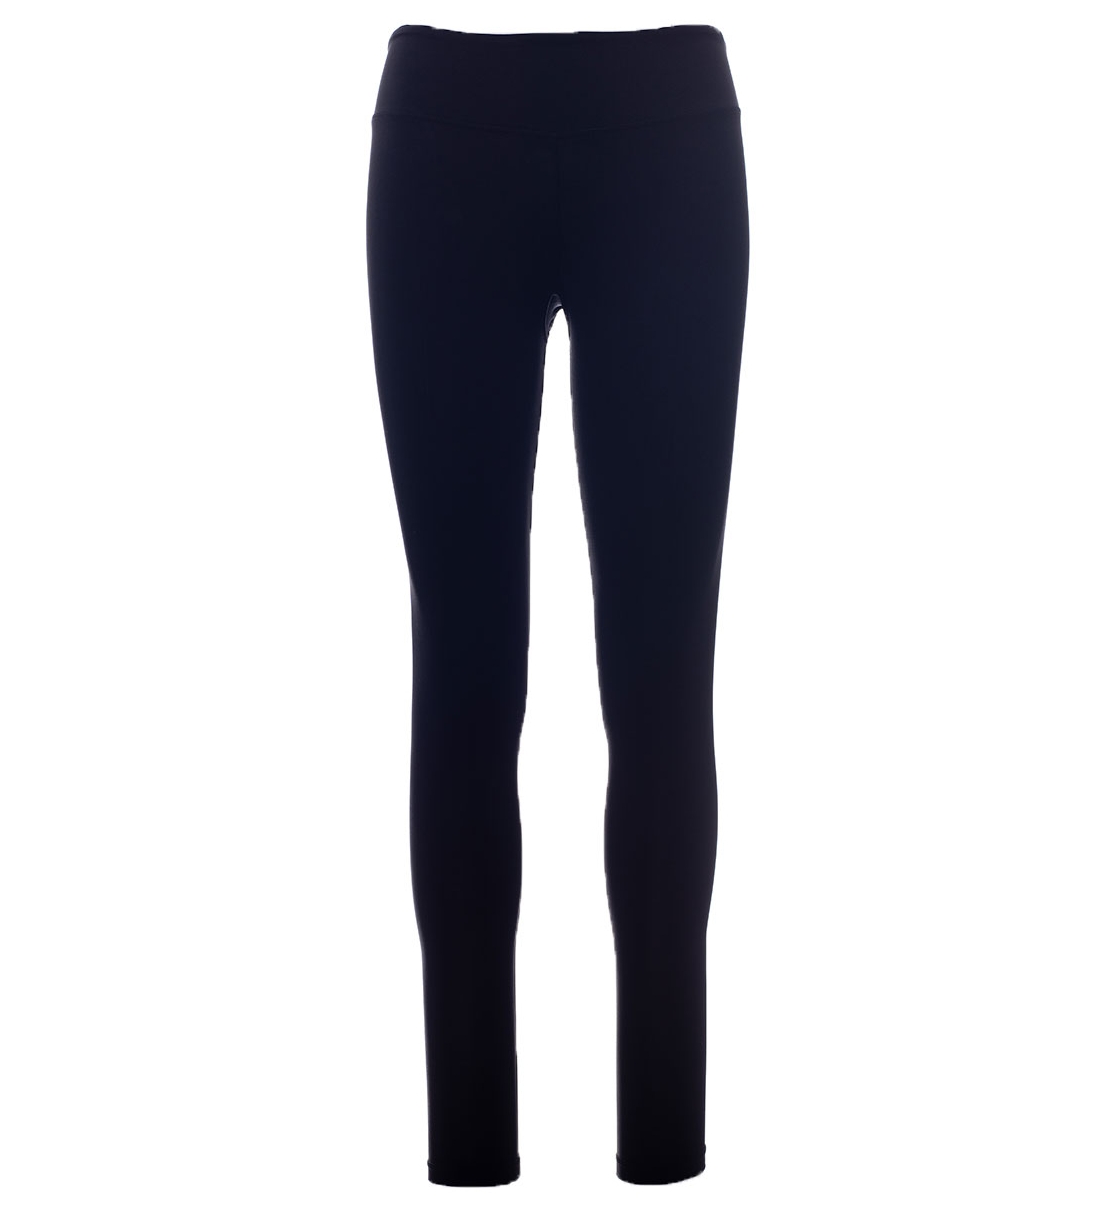 Body Action Fw20 Womens Traning Tights